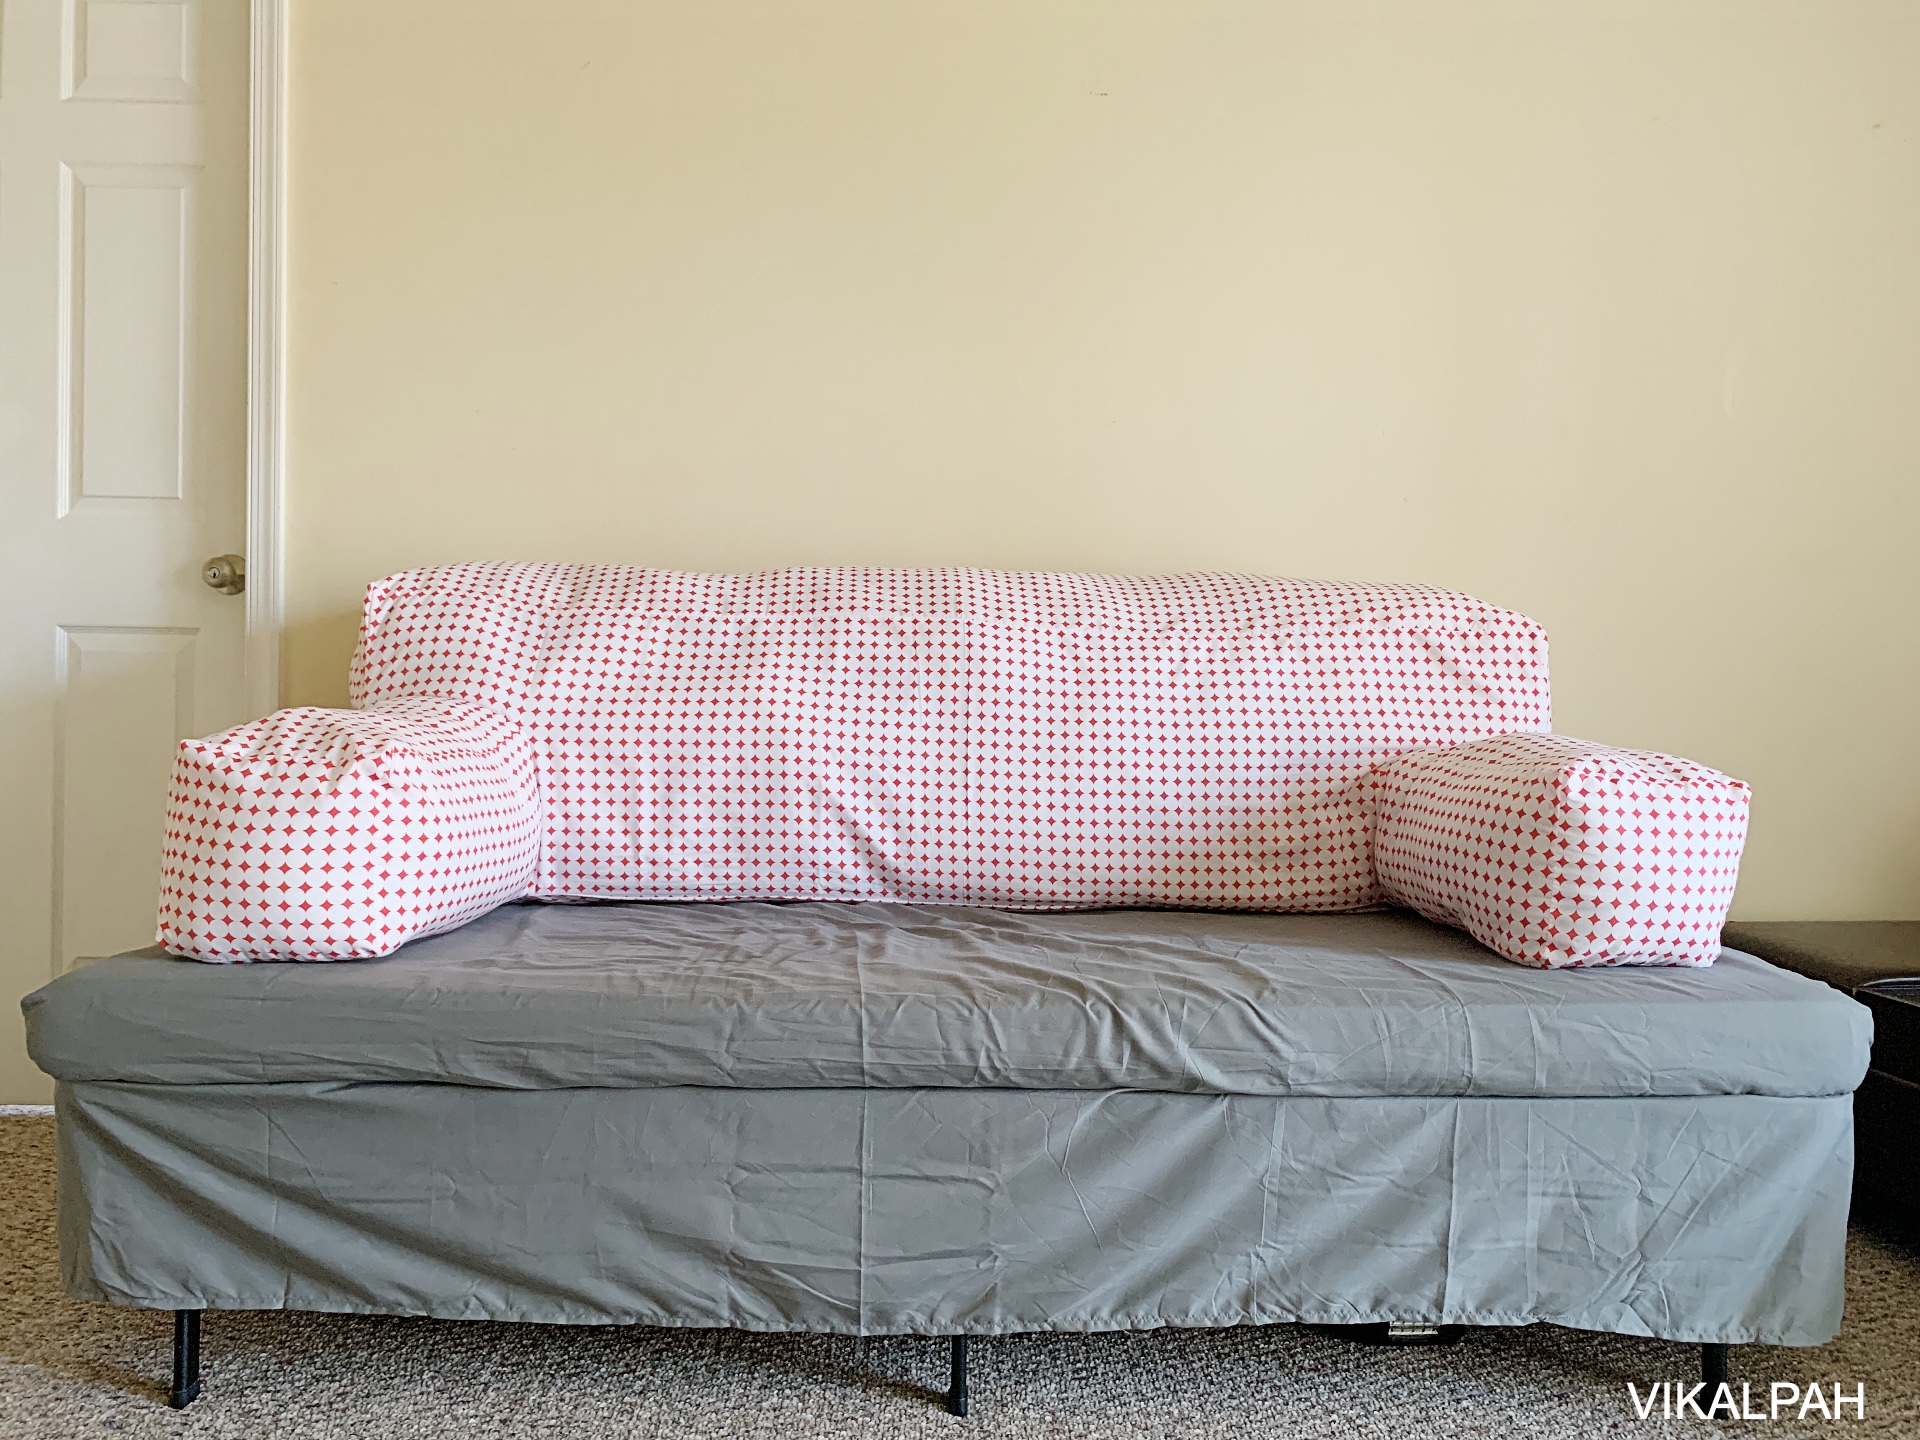 Twin Bed Into A Couch Diy Cover, Make A Couch Out Of Twin Bed